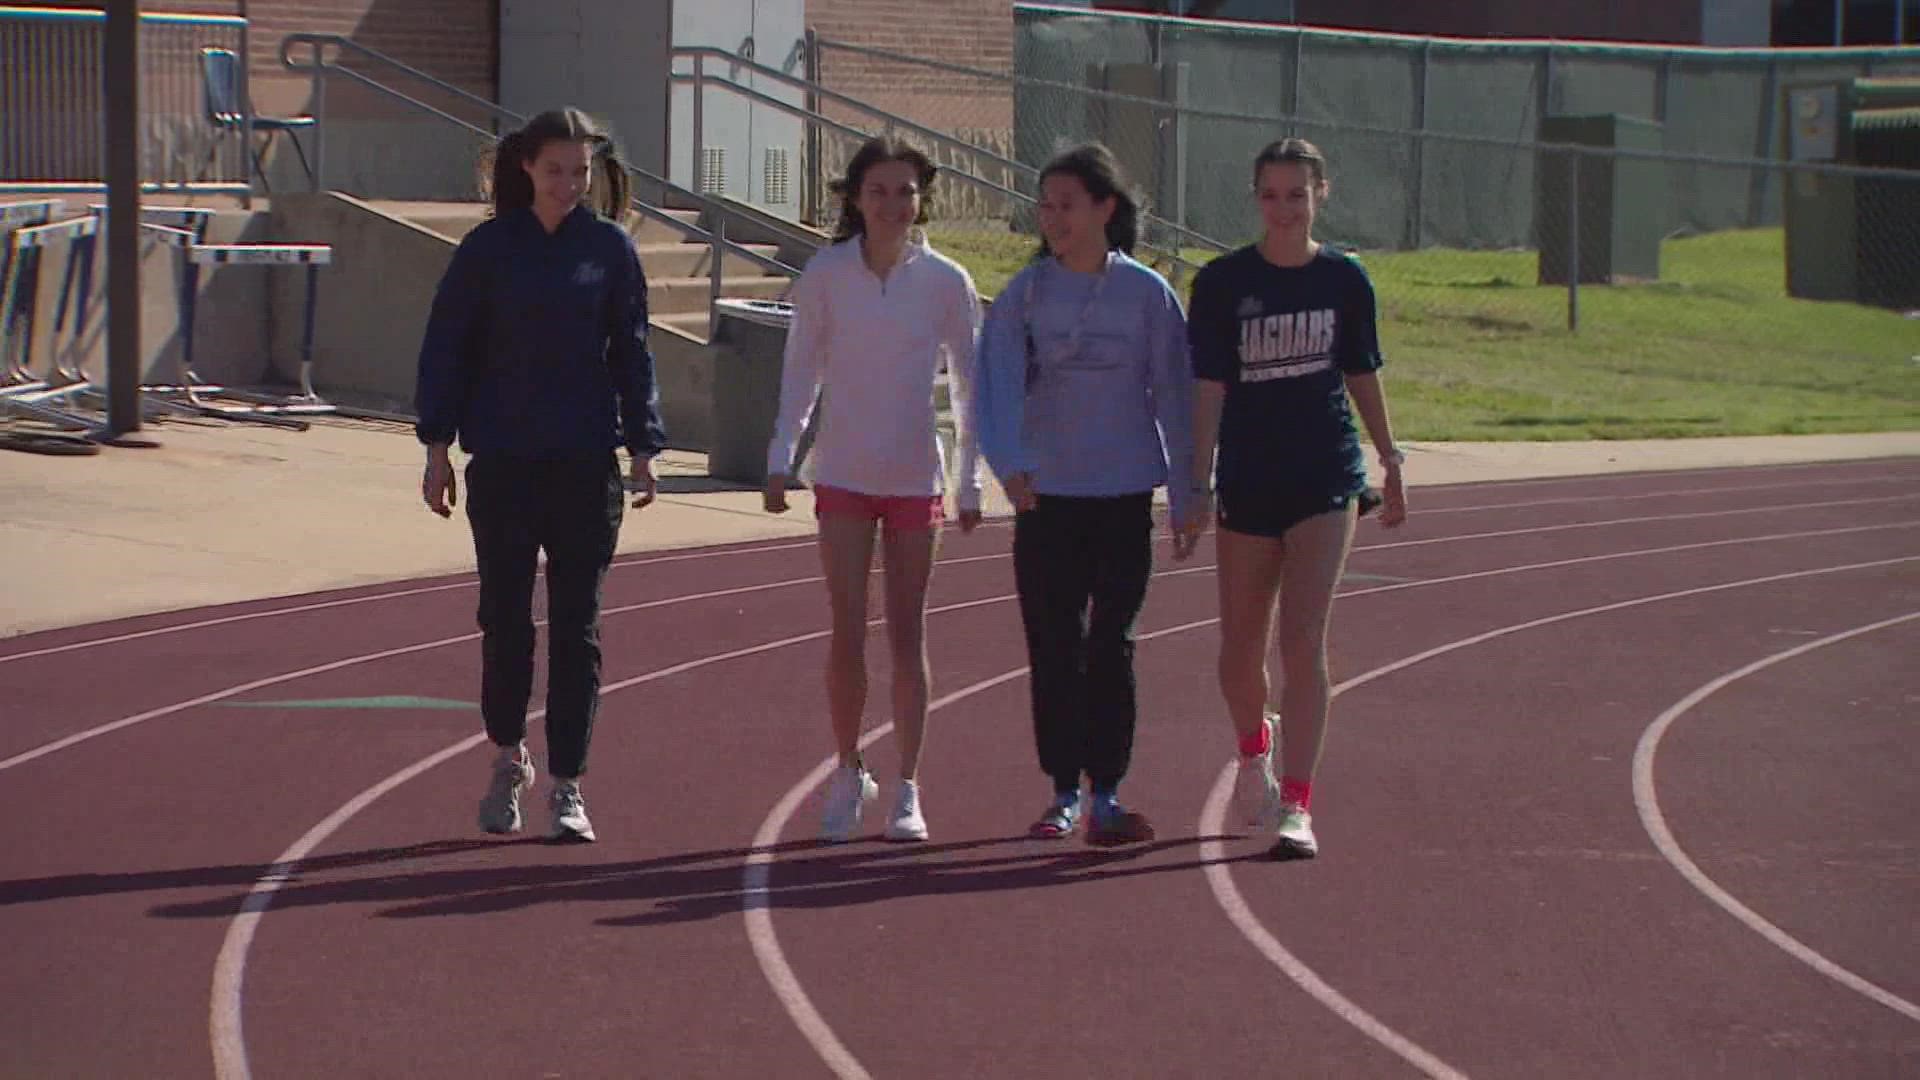 Led by senior superstar Natalie Cook, they've combined to set multiple national records.